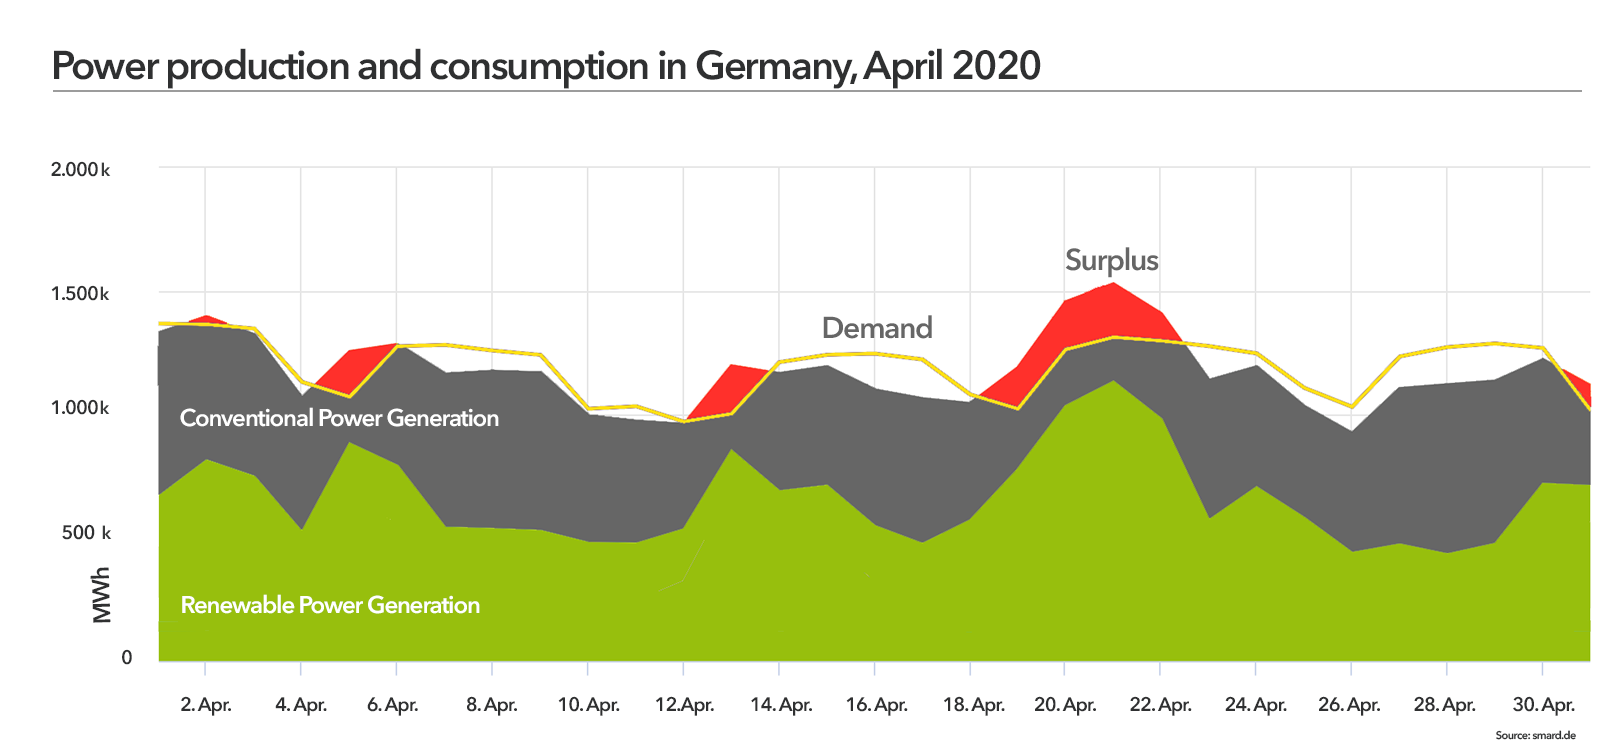 Power Production in Germany during the Corona Crisis